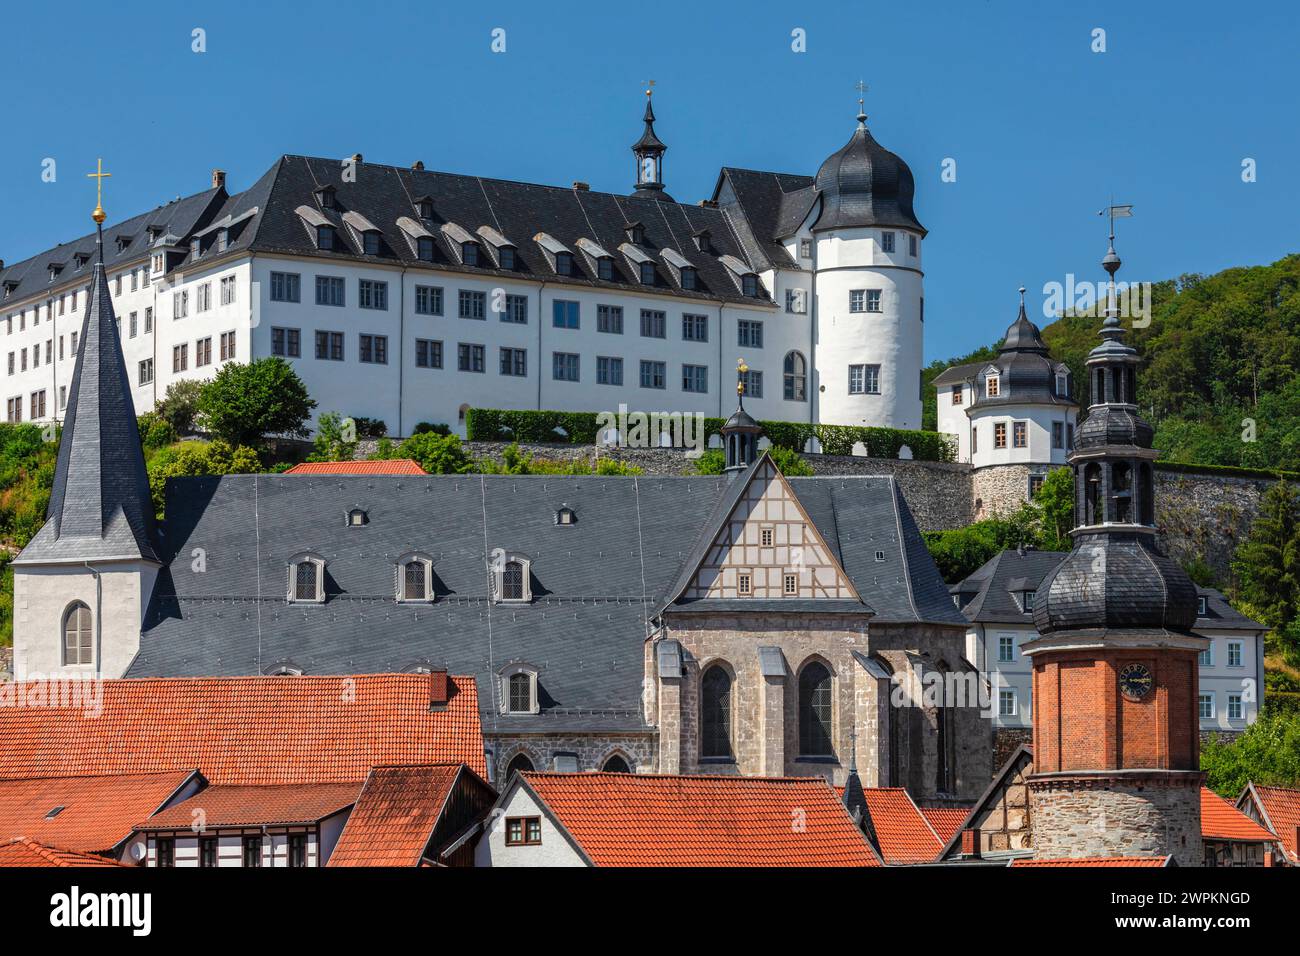 View over Stolberg with St. Martini church, Saigerturm tower and castle, Harz, Saxony-Anhalt, Germany, Europe Copyright: MarkusxLange 1160-5348 Stock Photo